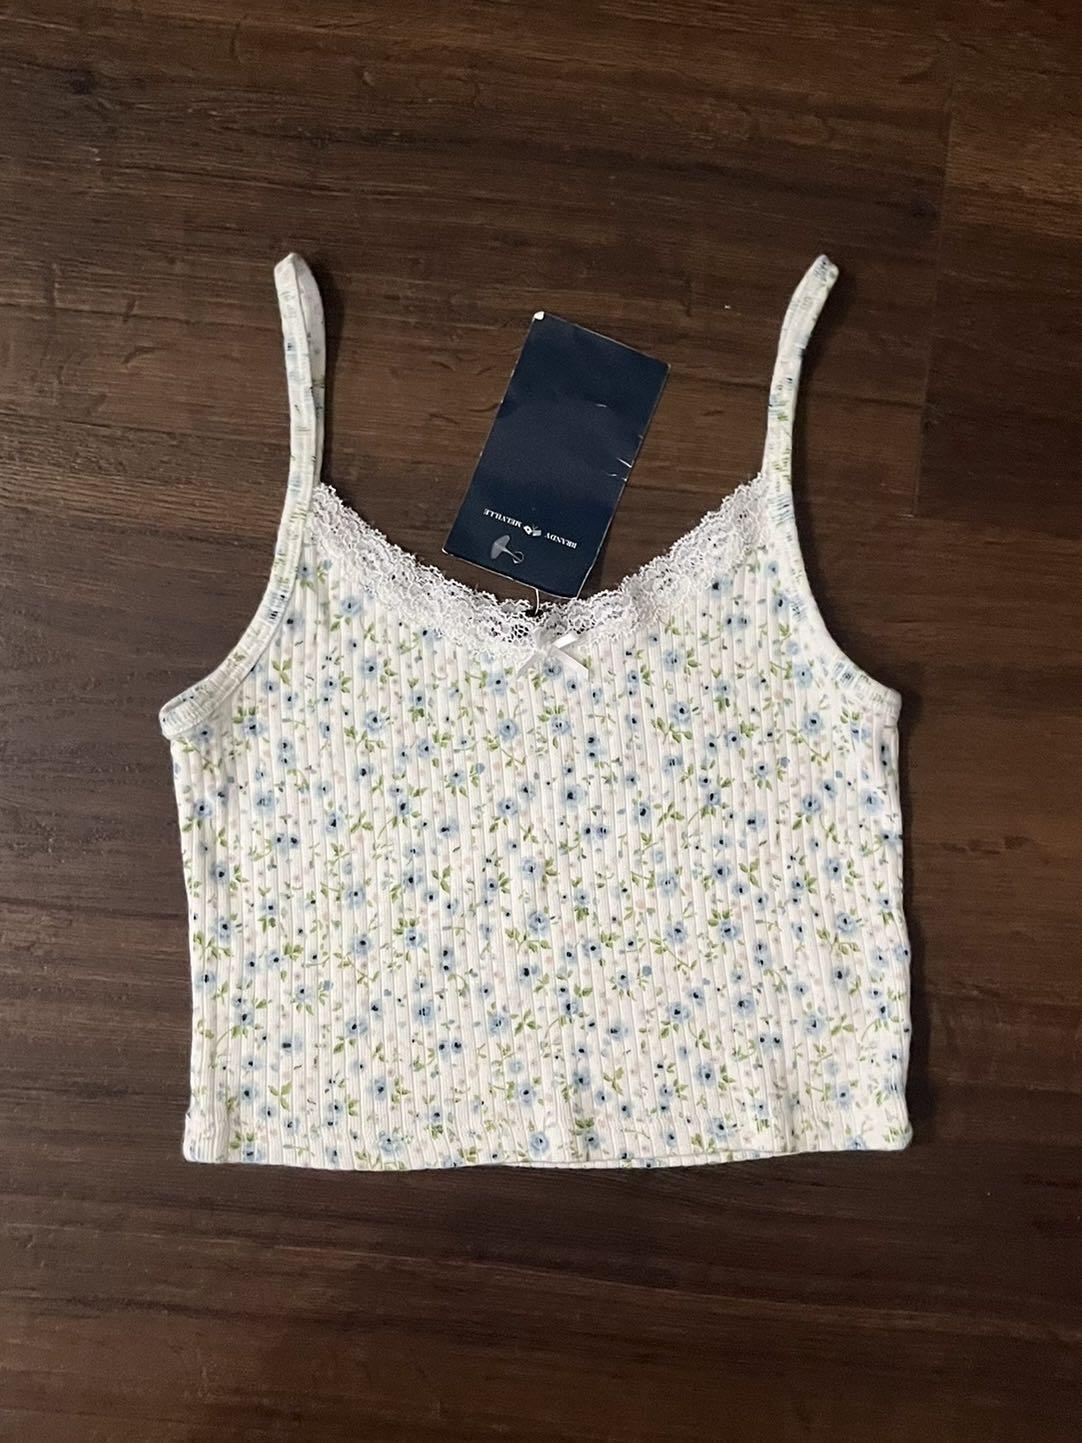 BNWT Brandy Melville Skylar white green blue floral lace ribbon cami tank  crop top, Women's Fashion, Tops, Sleeveless on Carousell